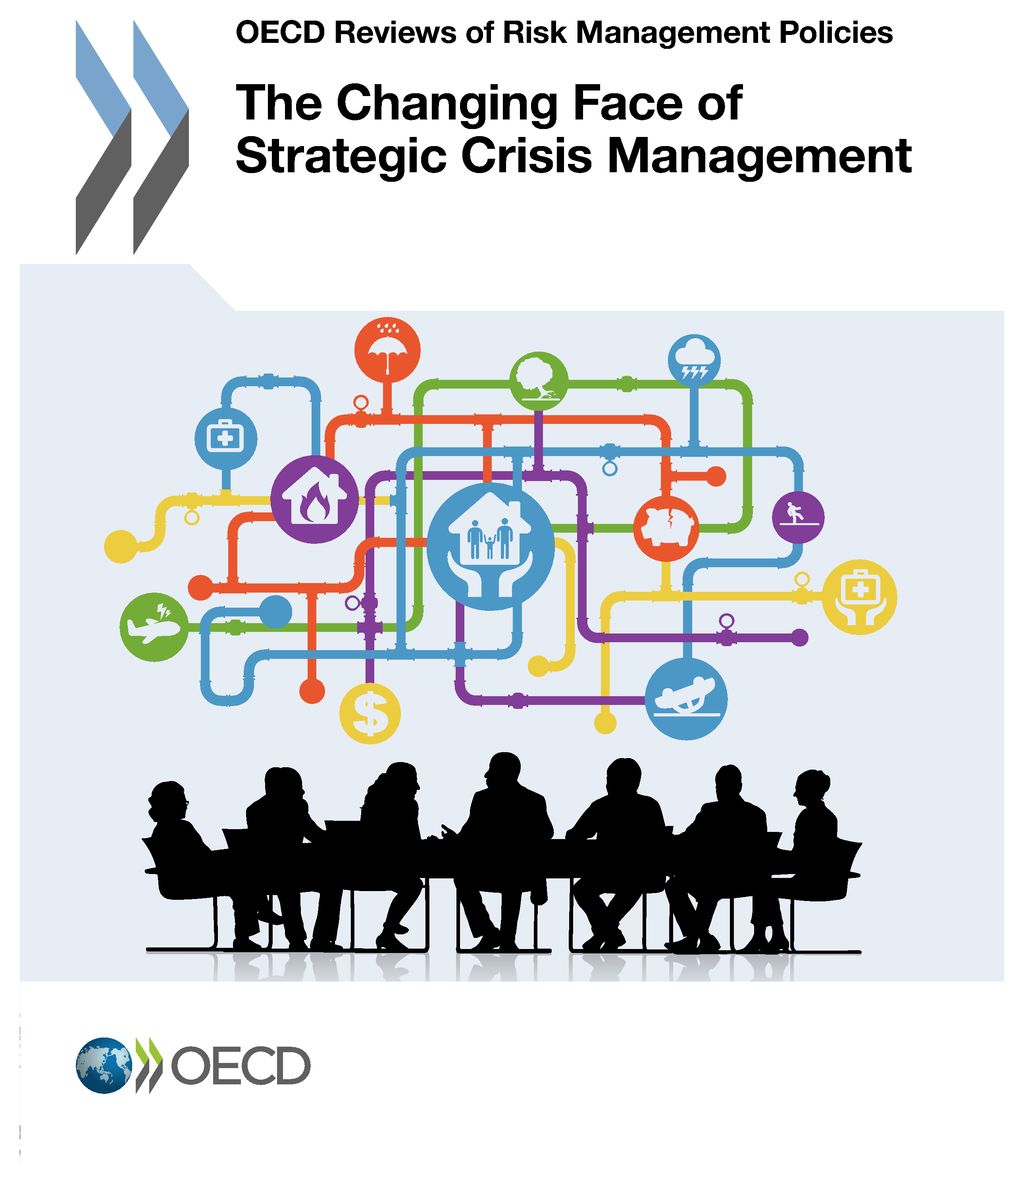 (The) changing face of strategic crisis management 책표지